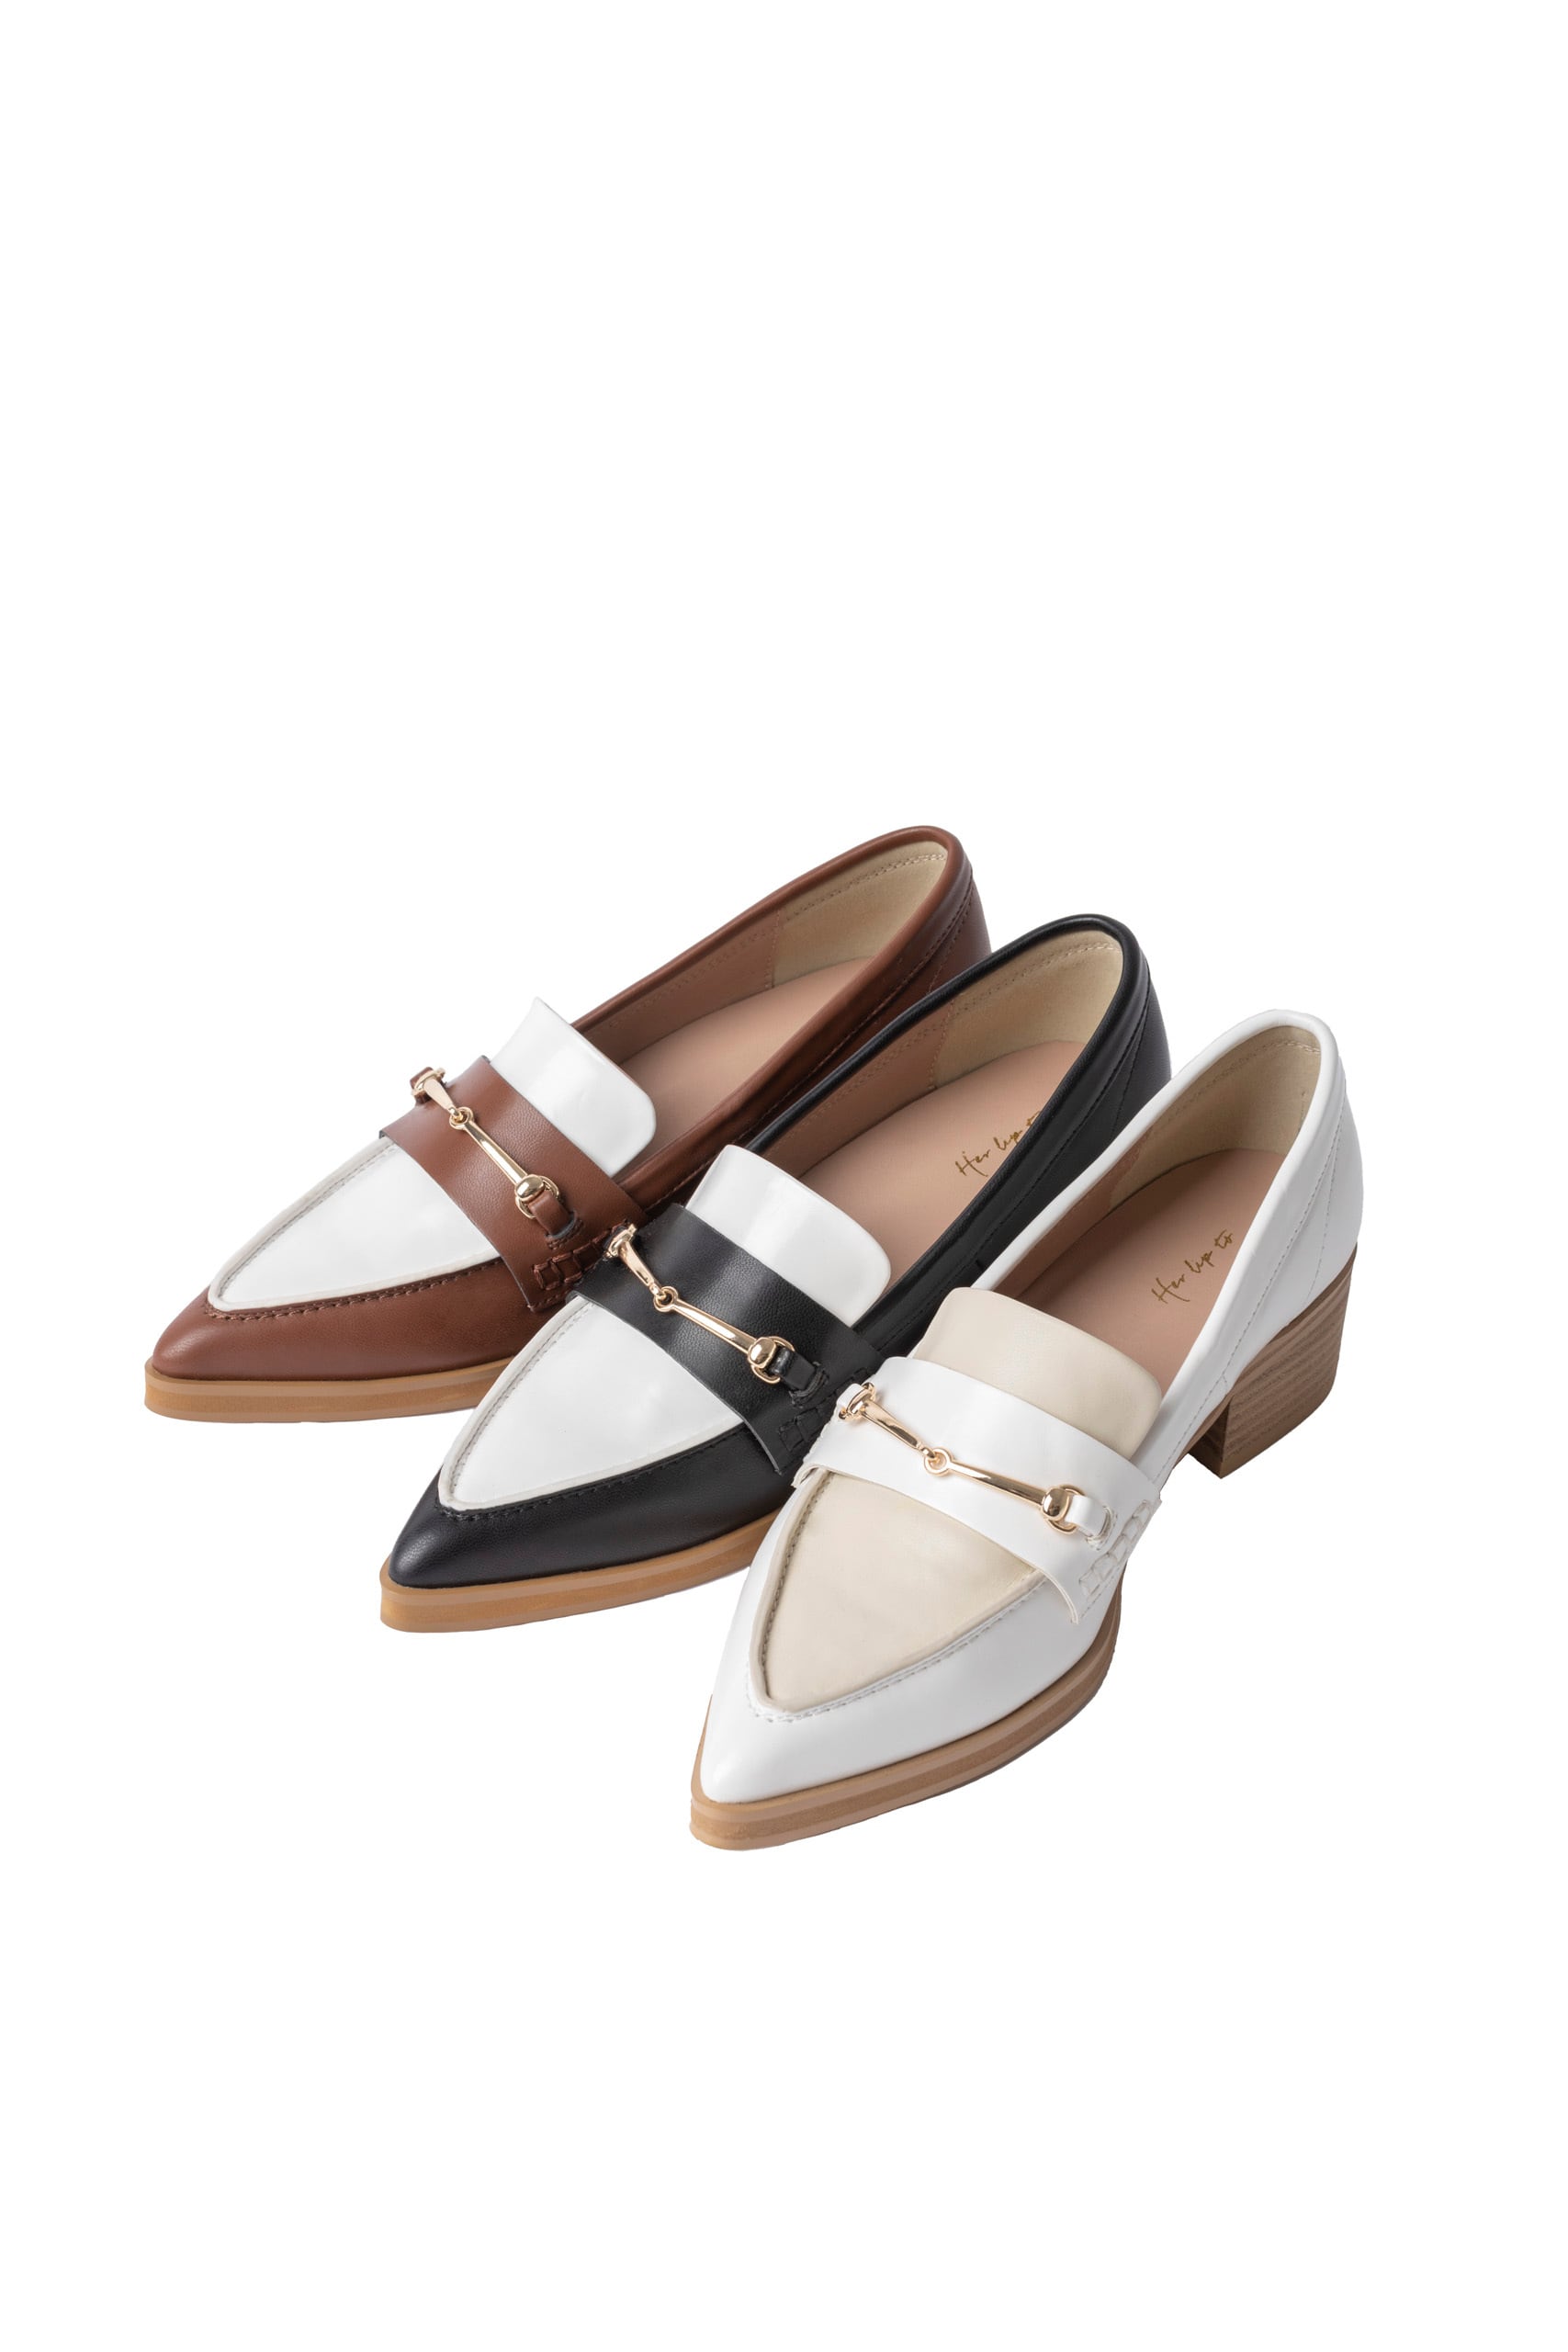 Her lip to Two-Tone Bit Loafers/white/37